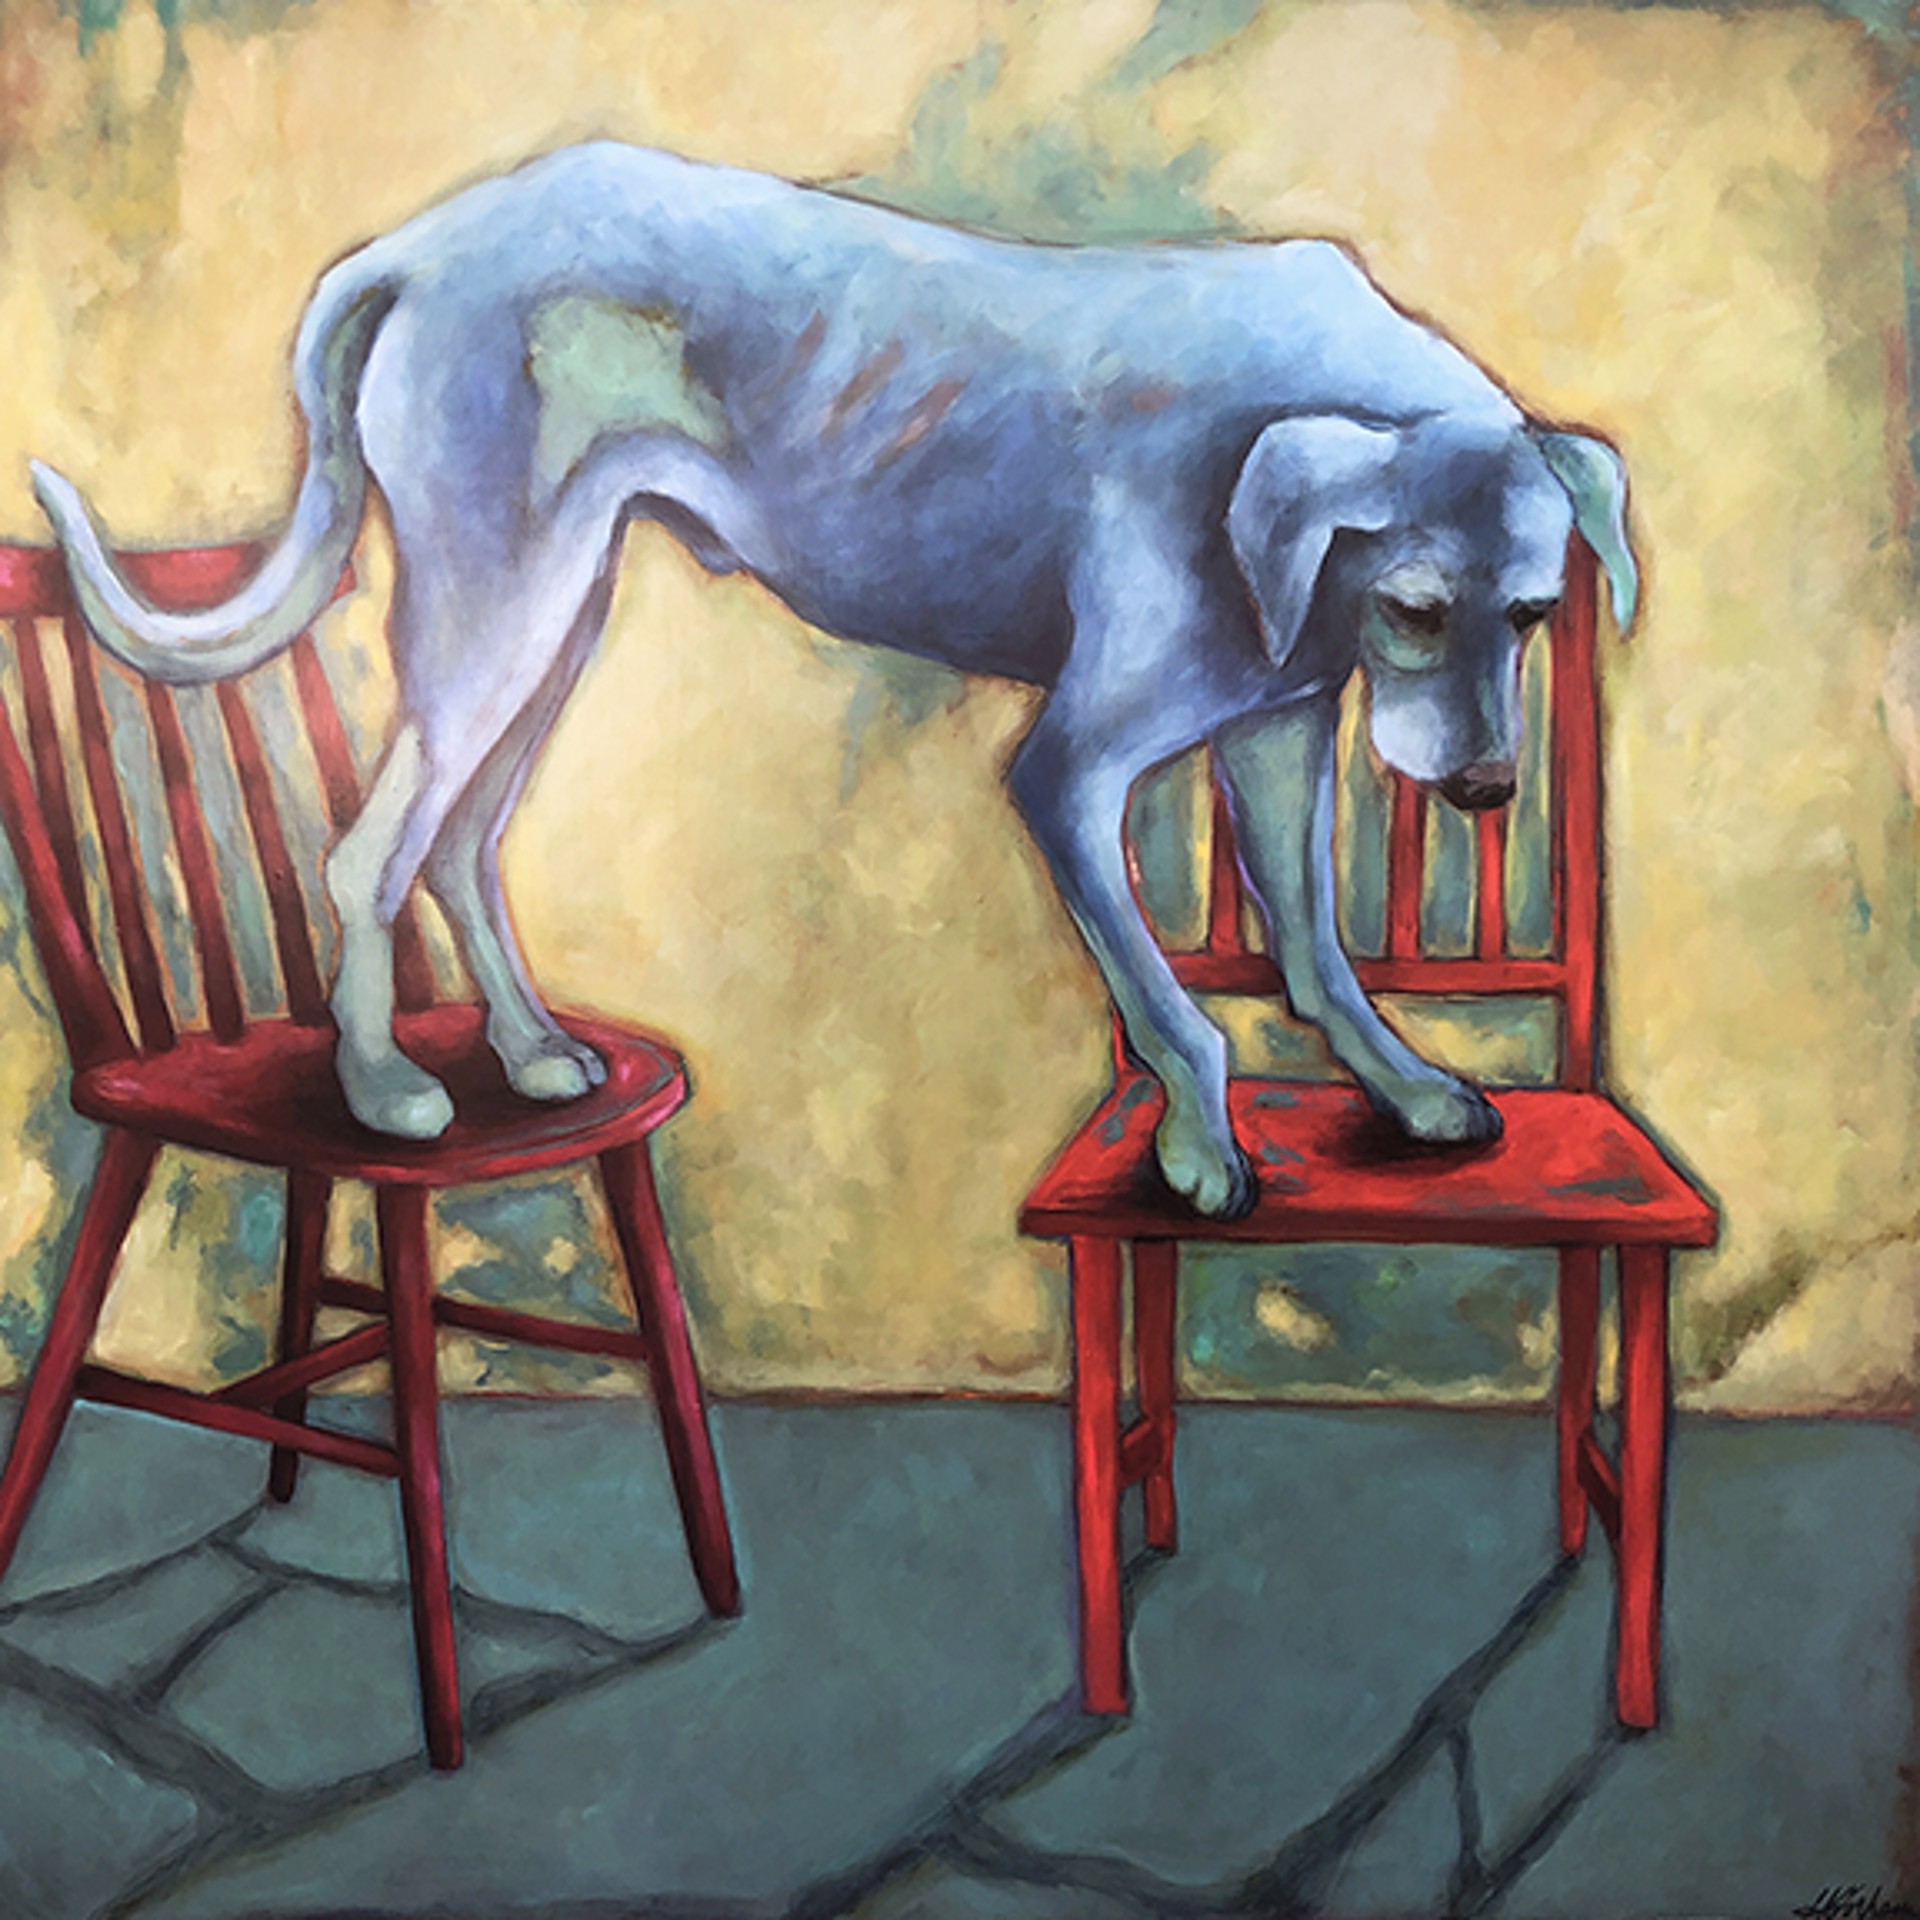 Sky Blue Dog on Red Red Chairs by Heather Gorham